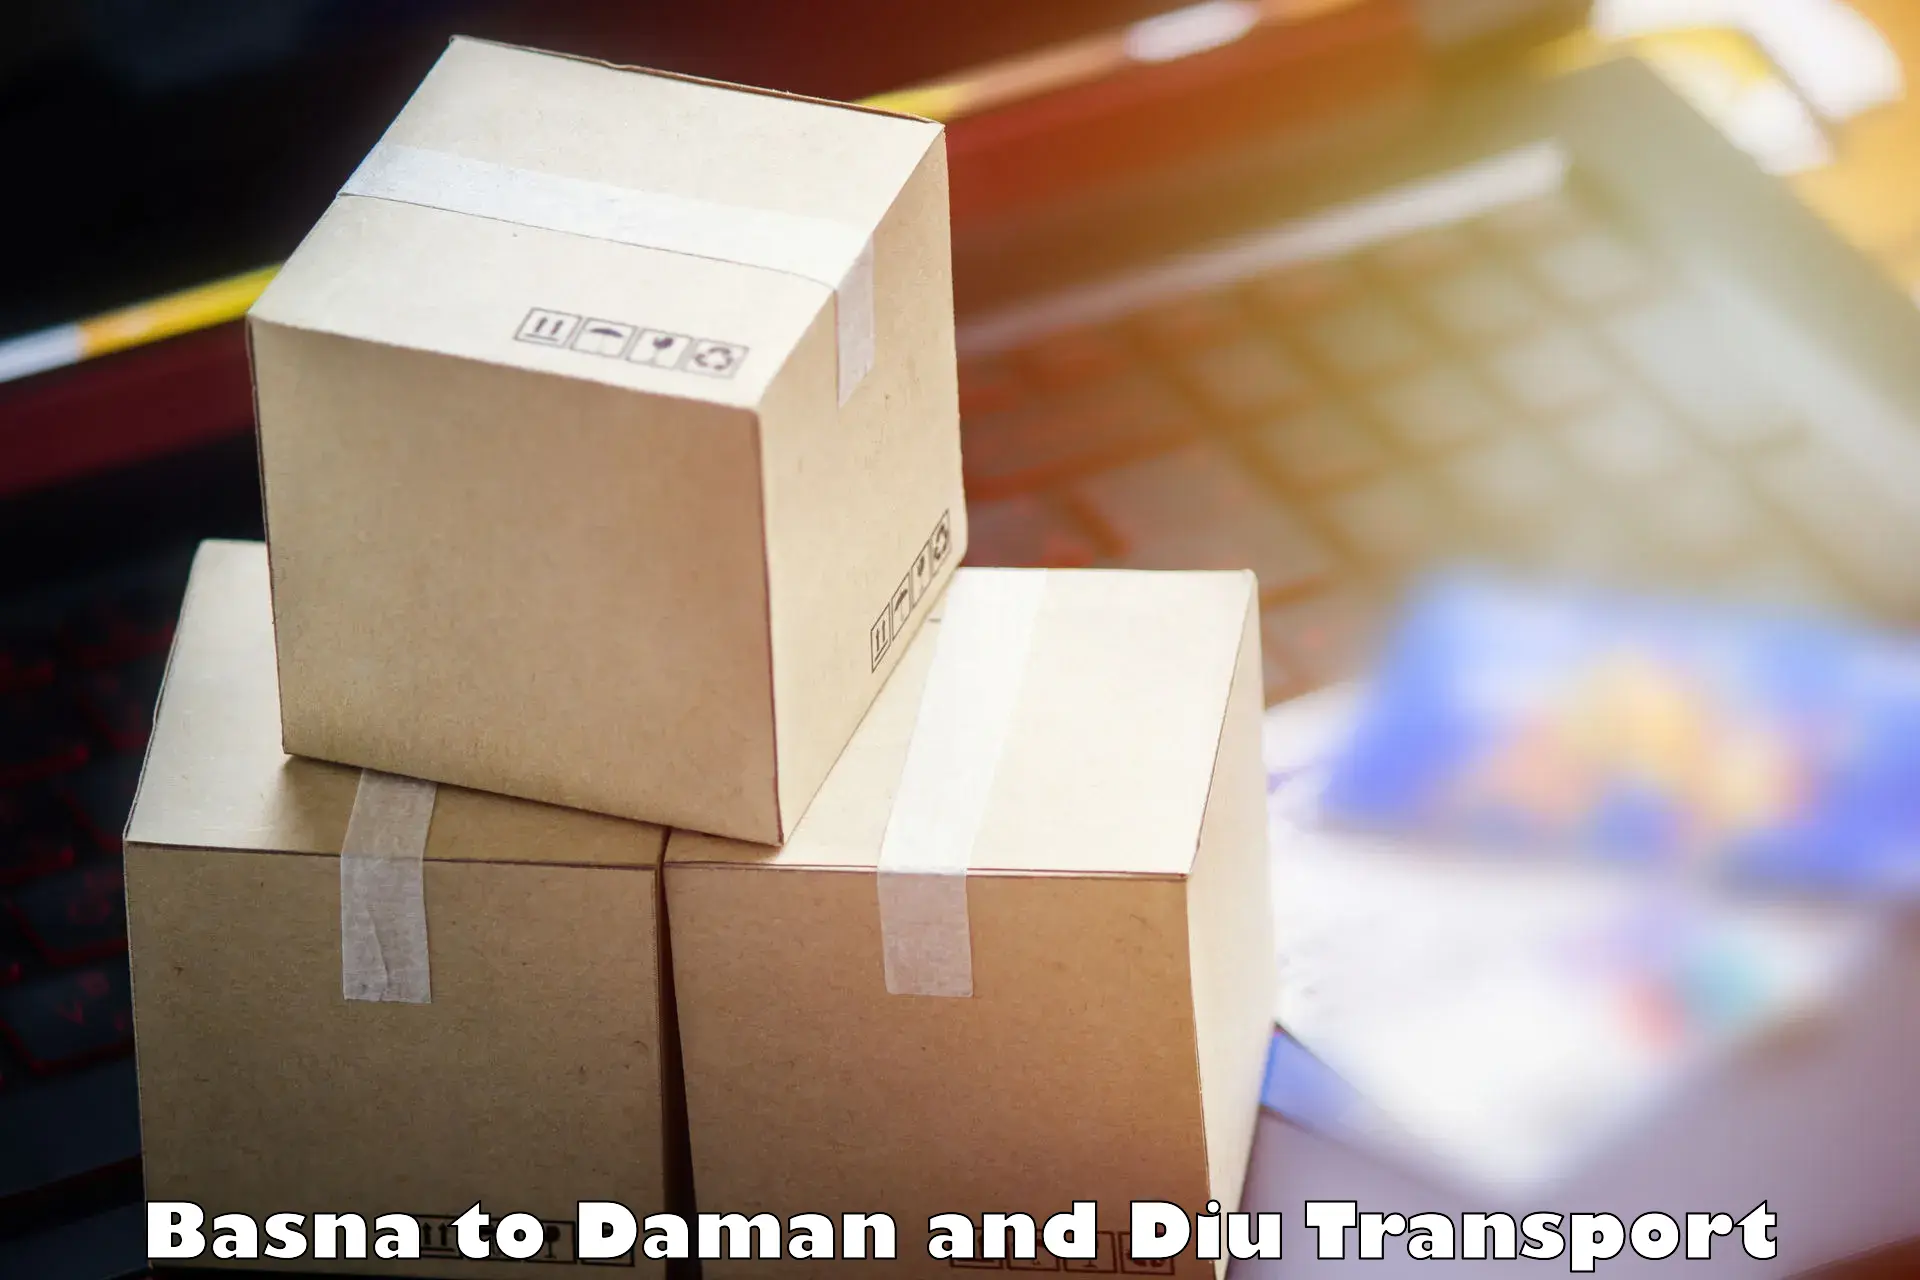 Commercial transport service Basna to Daman and Diu